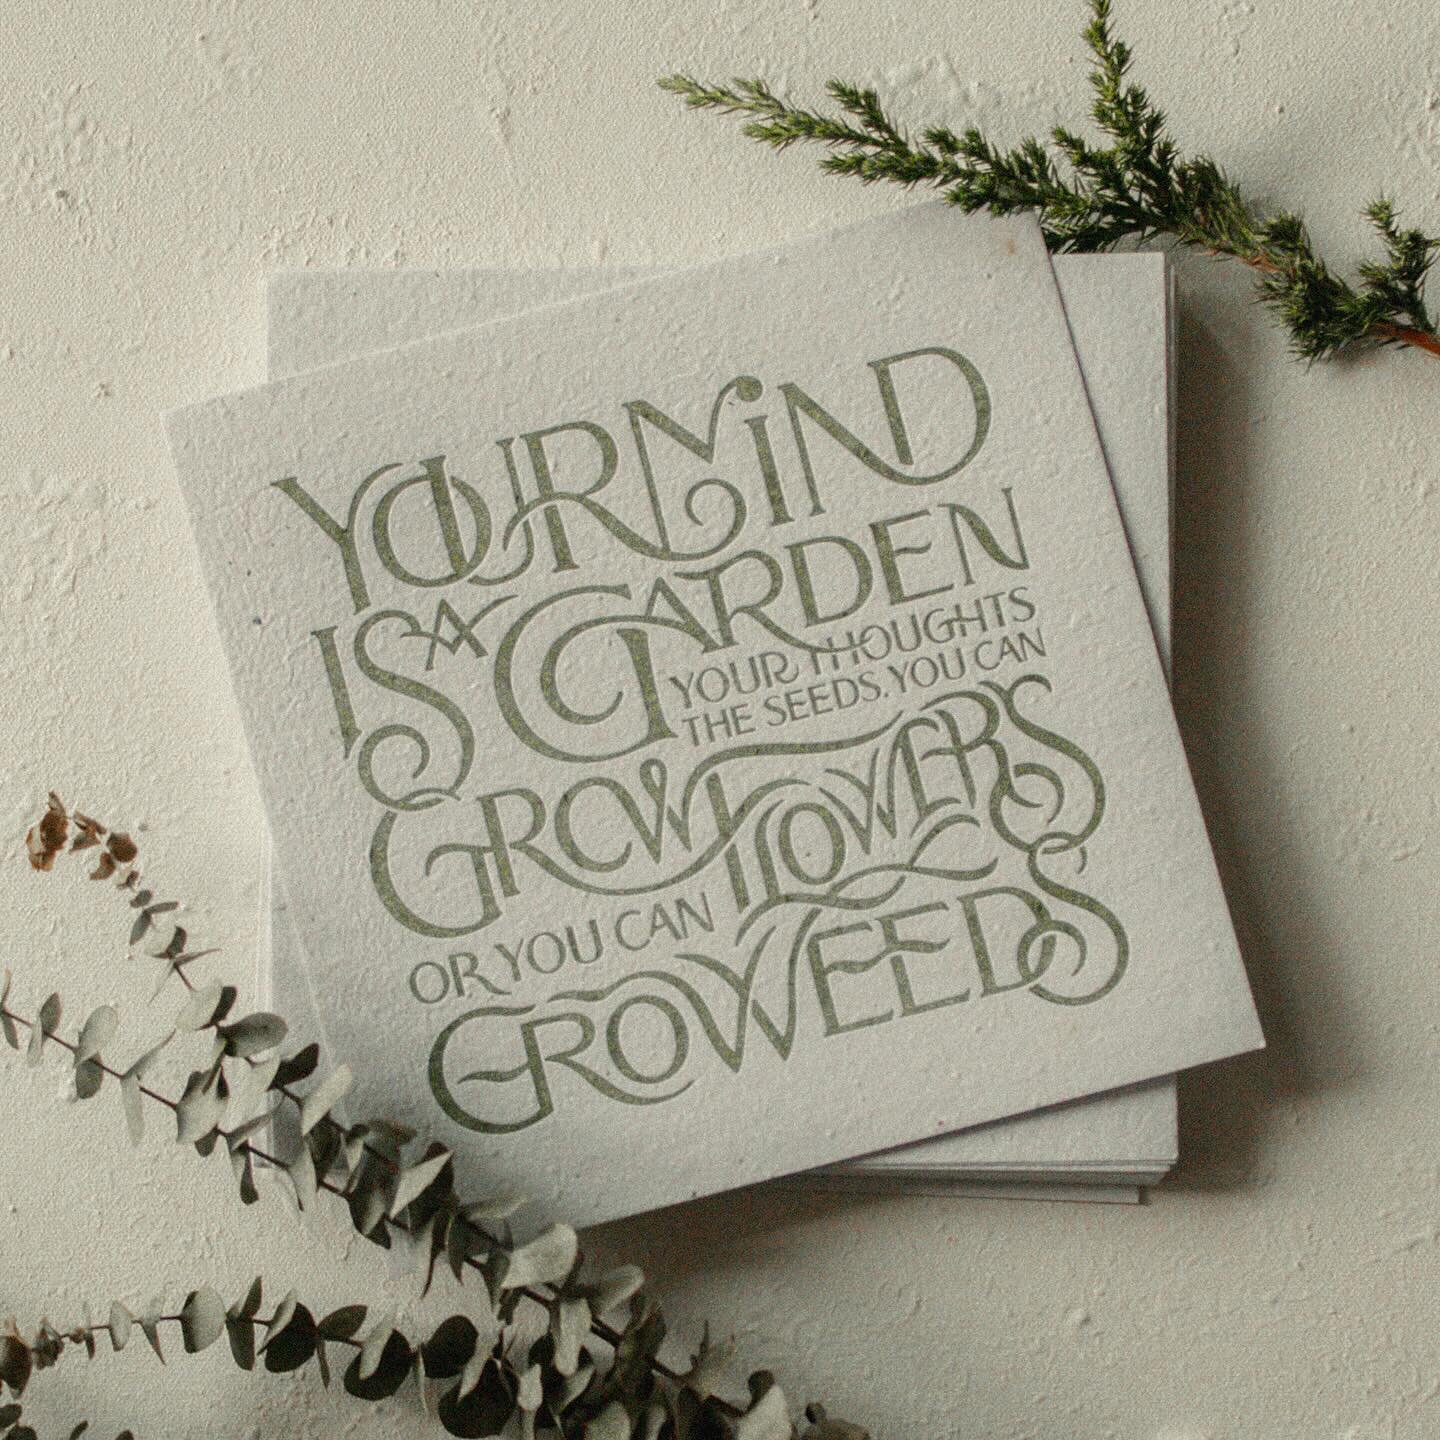 &ldquo;Your mind is a garden, your thoughts the seeds. You can grow flowers or you can grow weeds.&rdquo;

Our clients have the most creative ideas!

Check out this Plantable Print we helped @jessetaylorcreative create! Letterpress printed on handmad